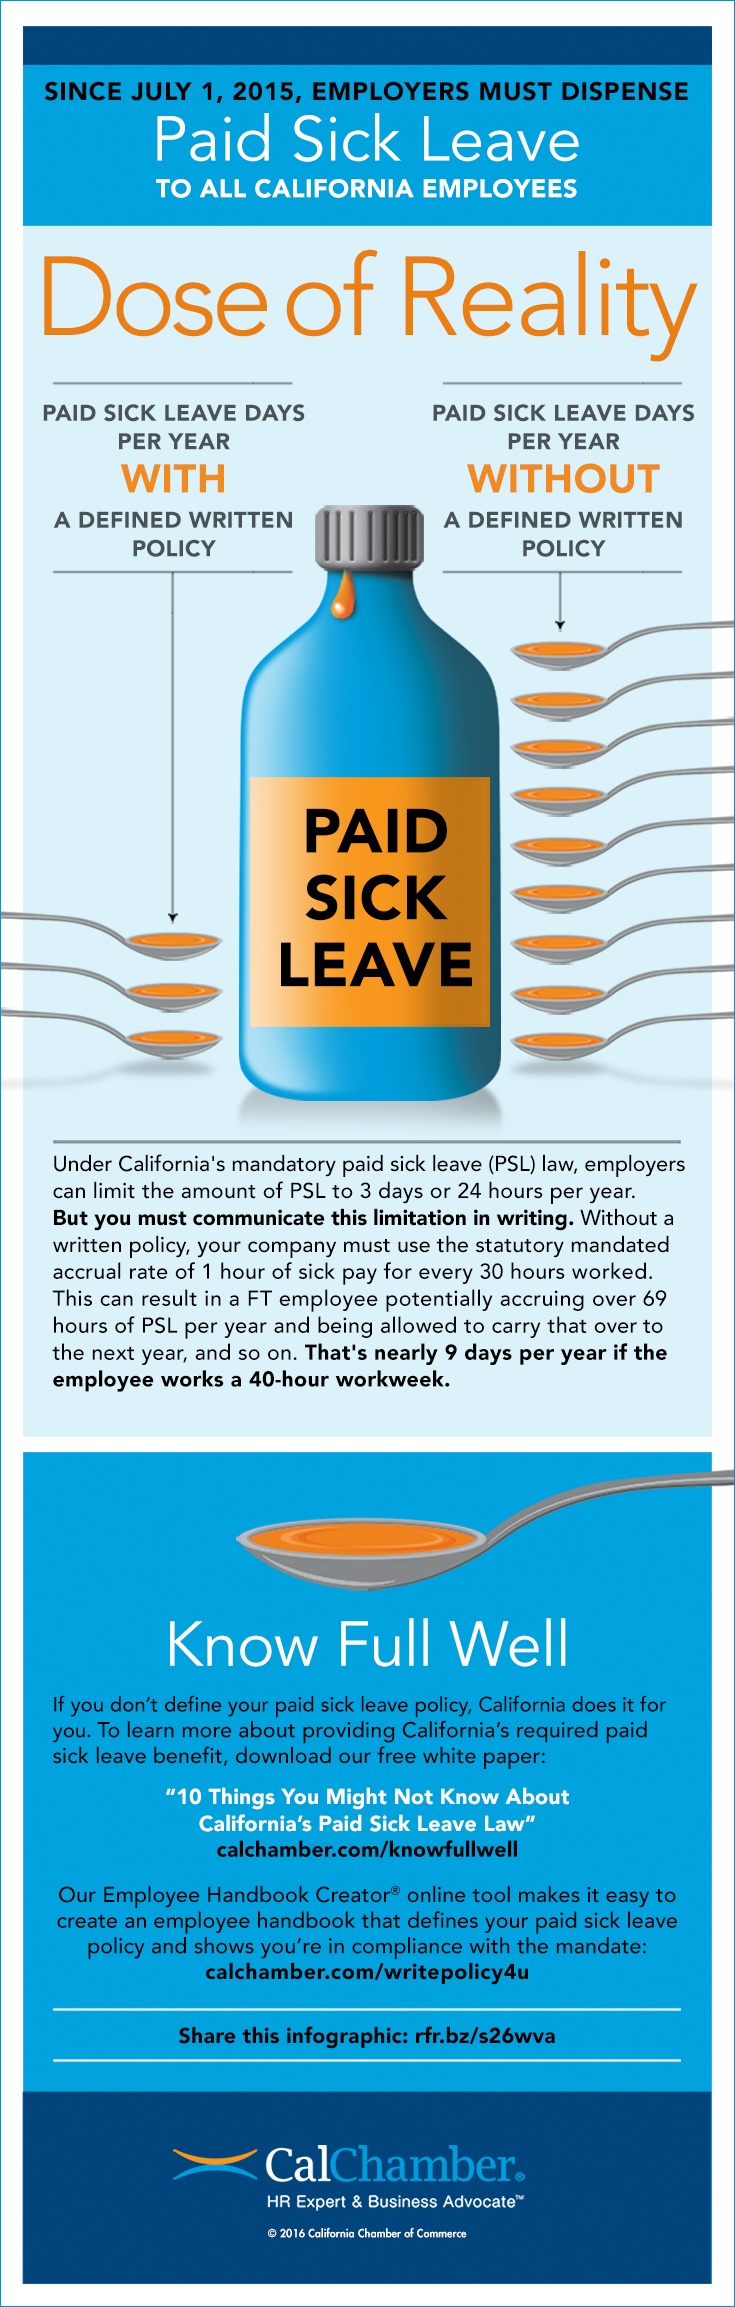 Keeping Up With California Paid Sick Leave Law [Infographic]